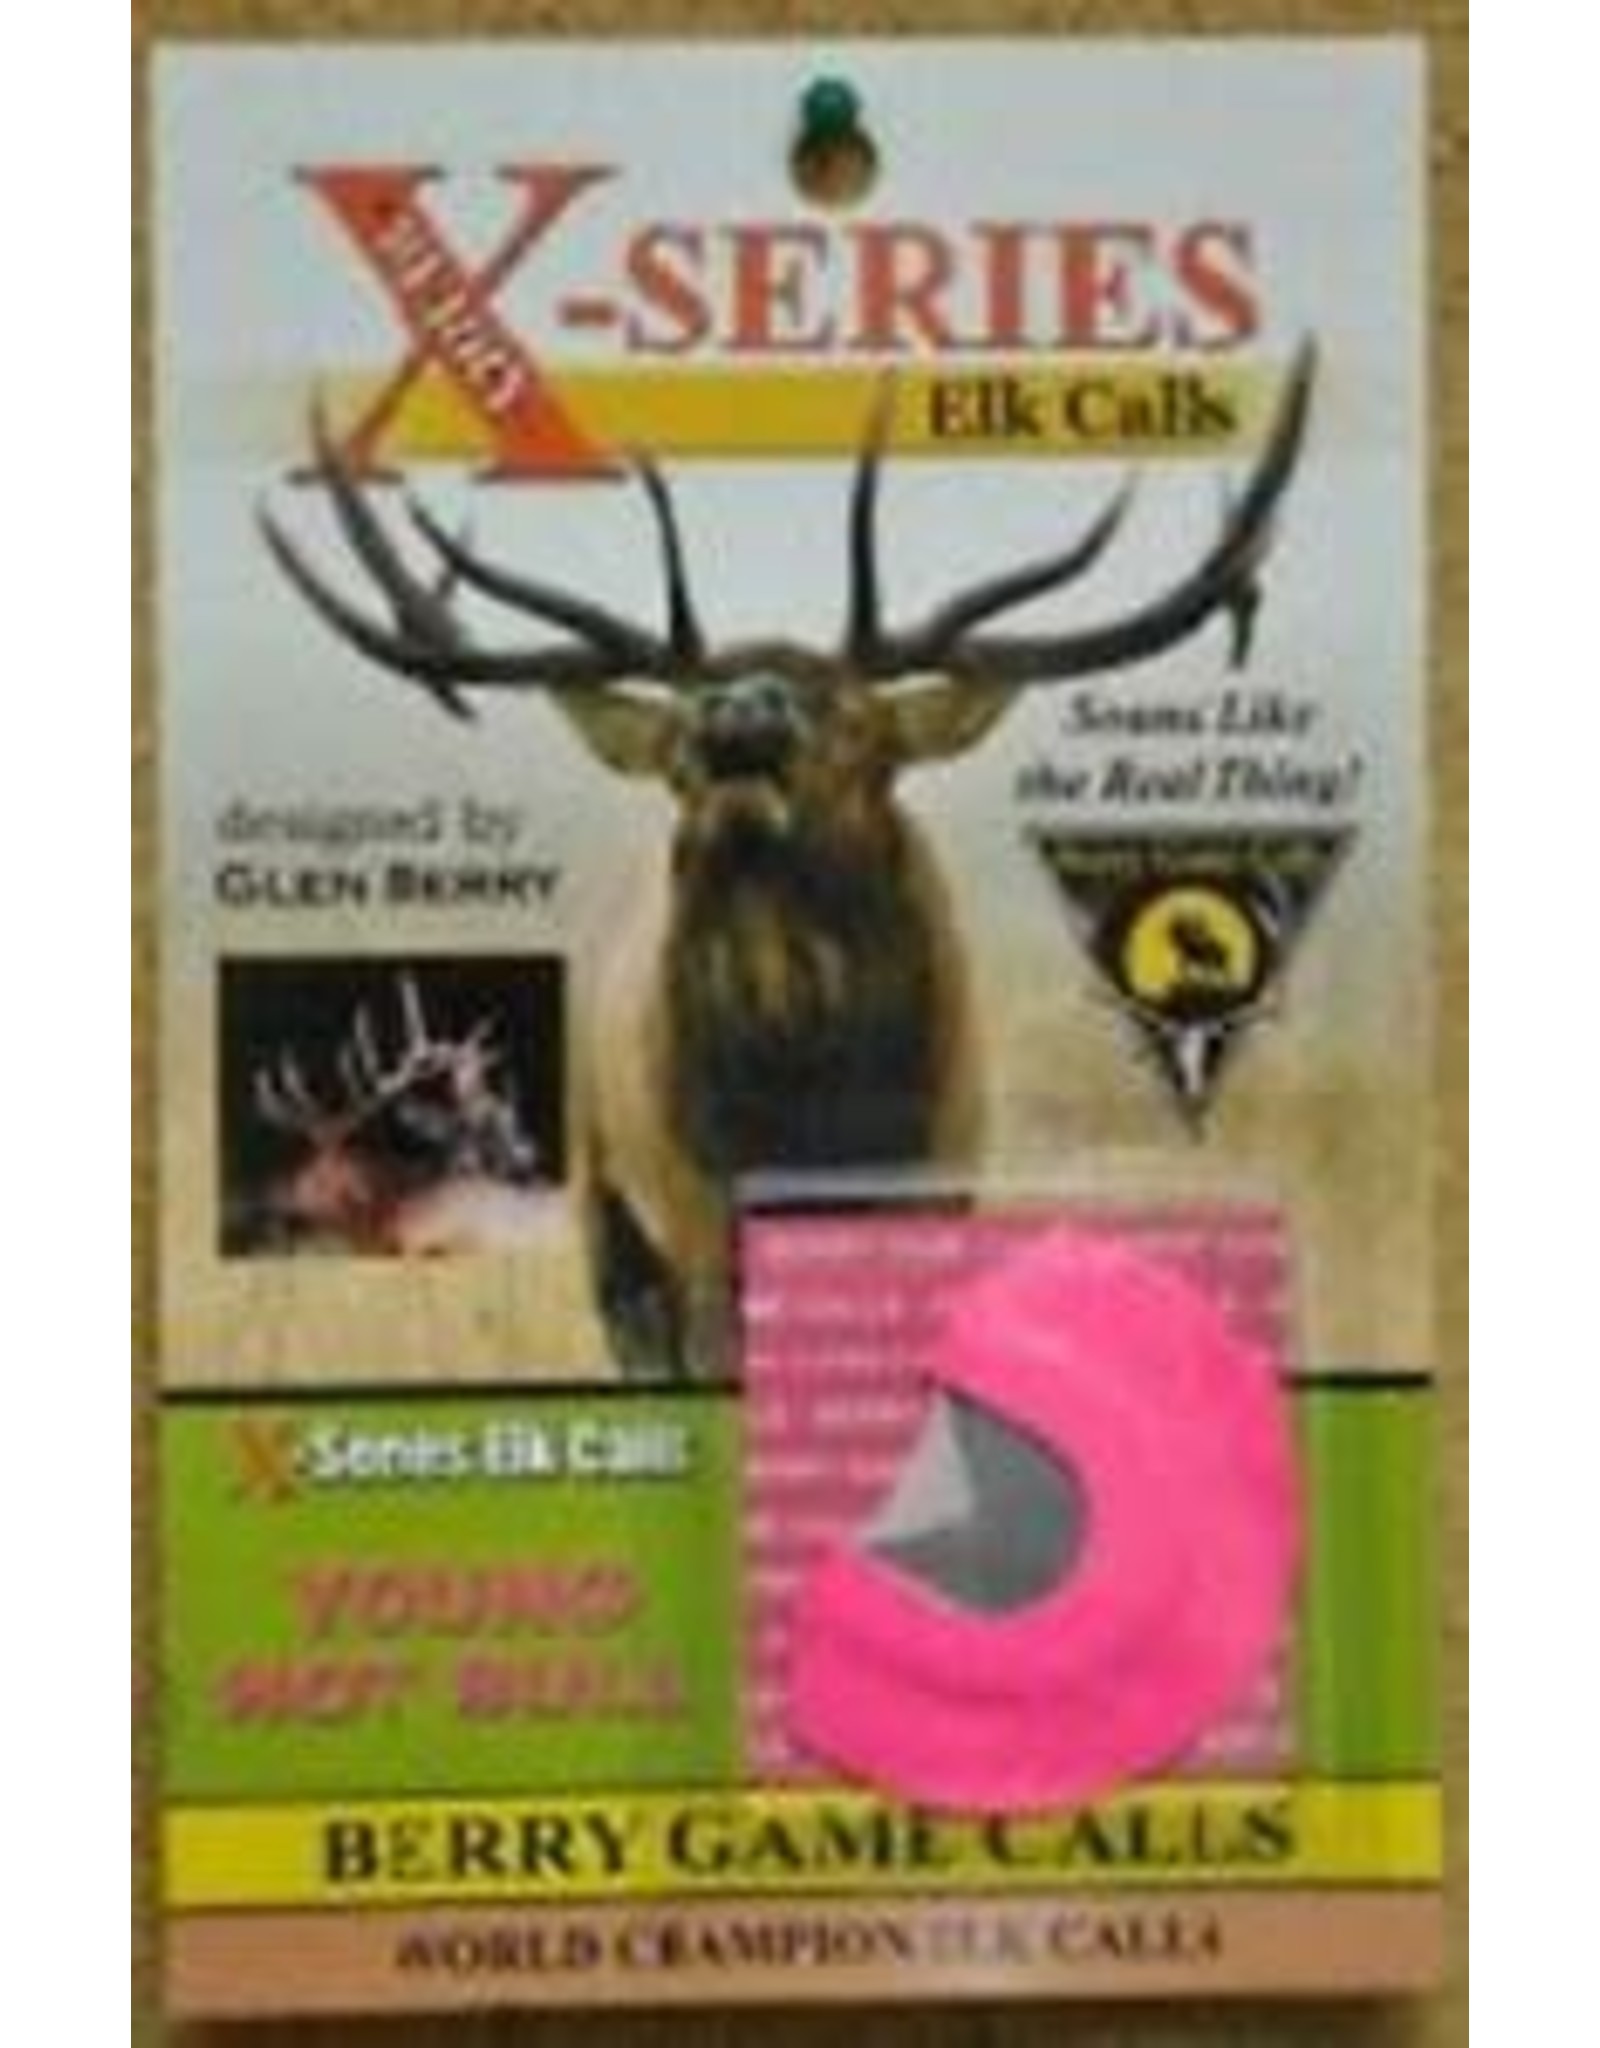 BERRY GAME CALLS BGC X-SERIES DIAPHRAGM MOUTH REED